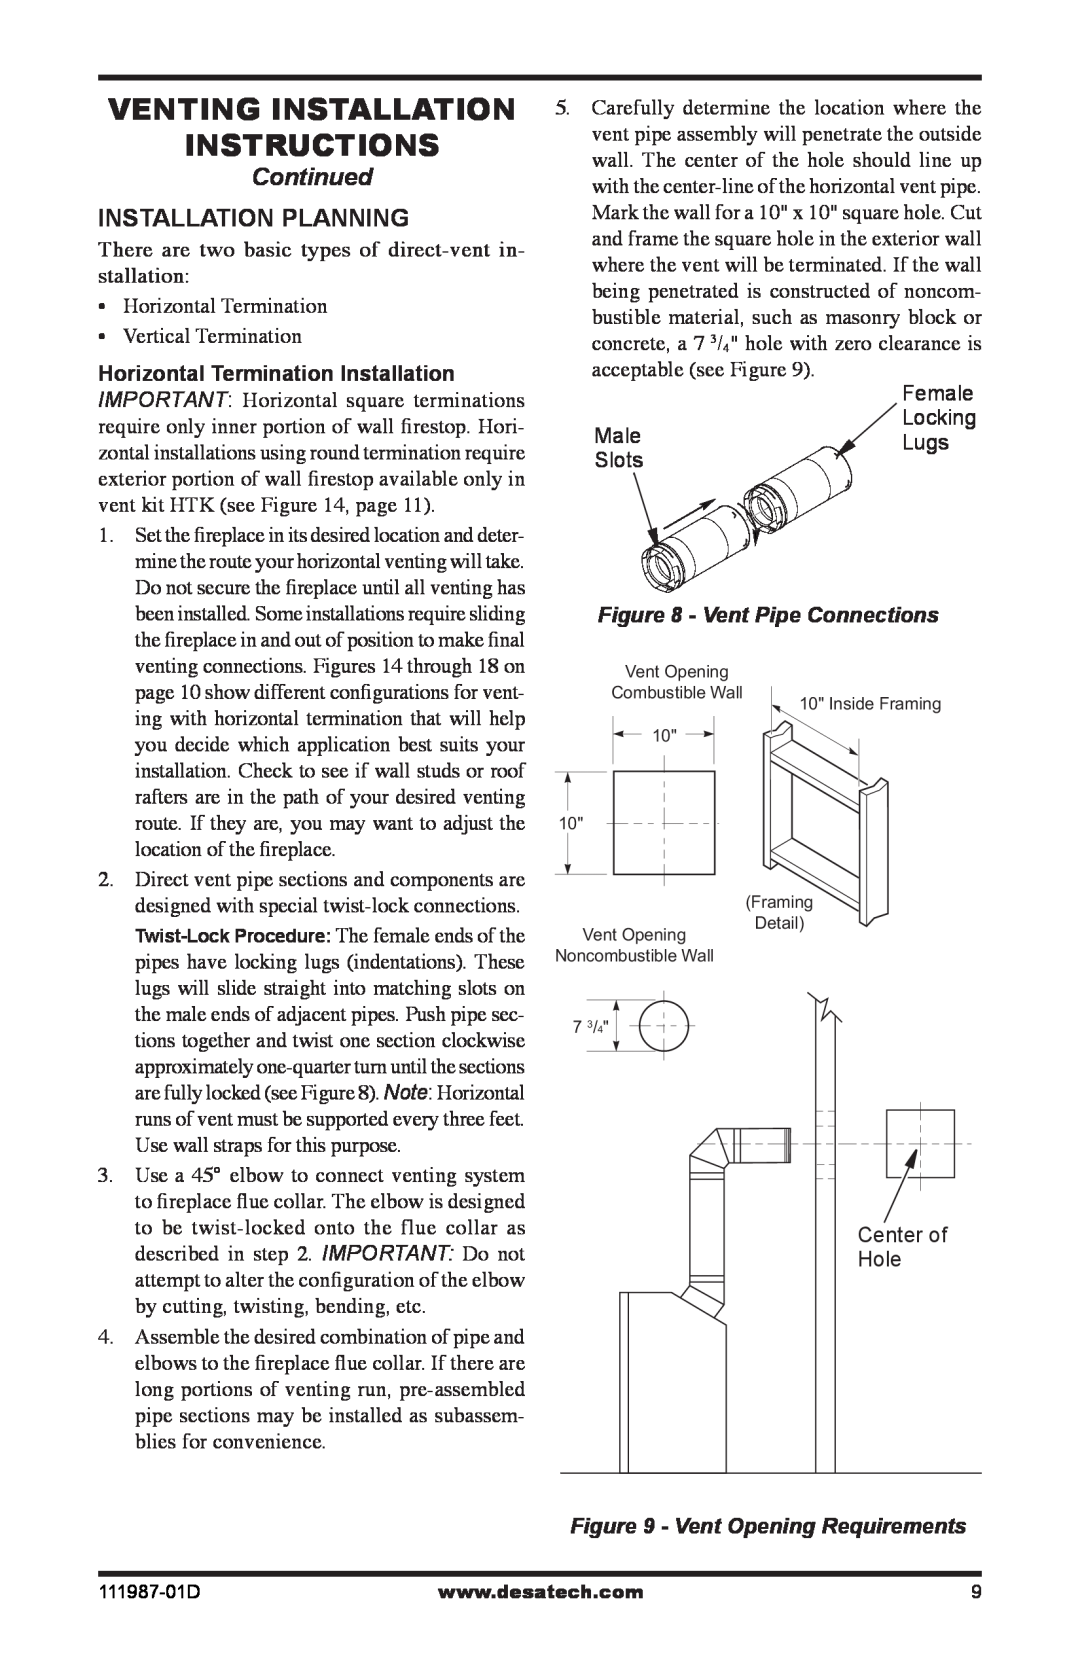 Desa (V)T32EN SERIES Venting Installation instructions, Continued, Installation Planning, Vent Pipe Connections 